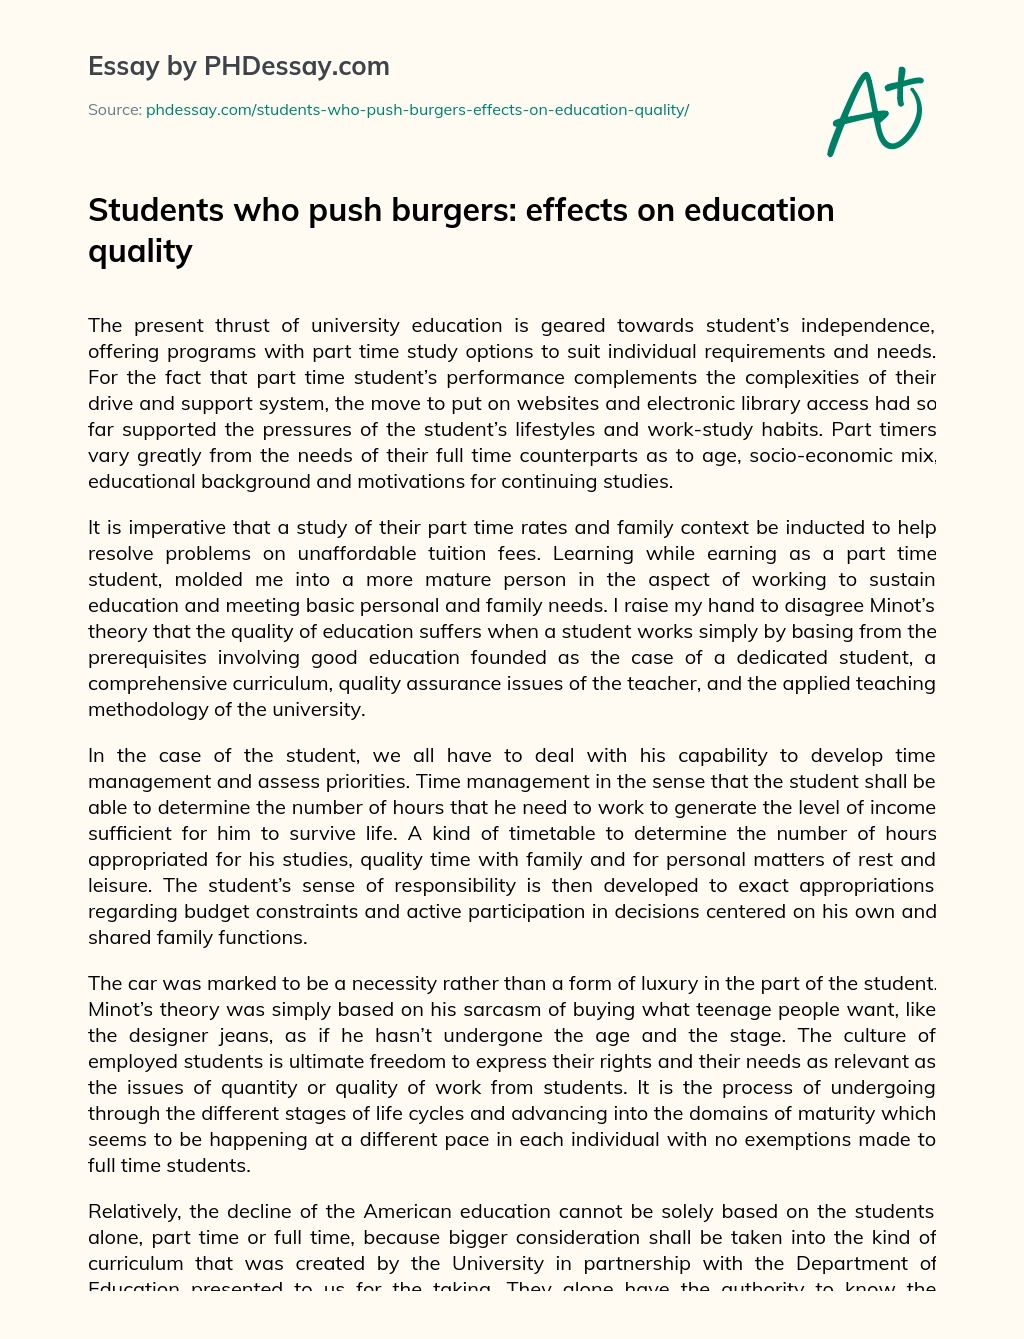 Students who push burgers: effects on education quality essay